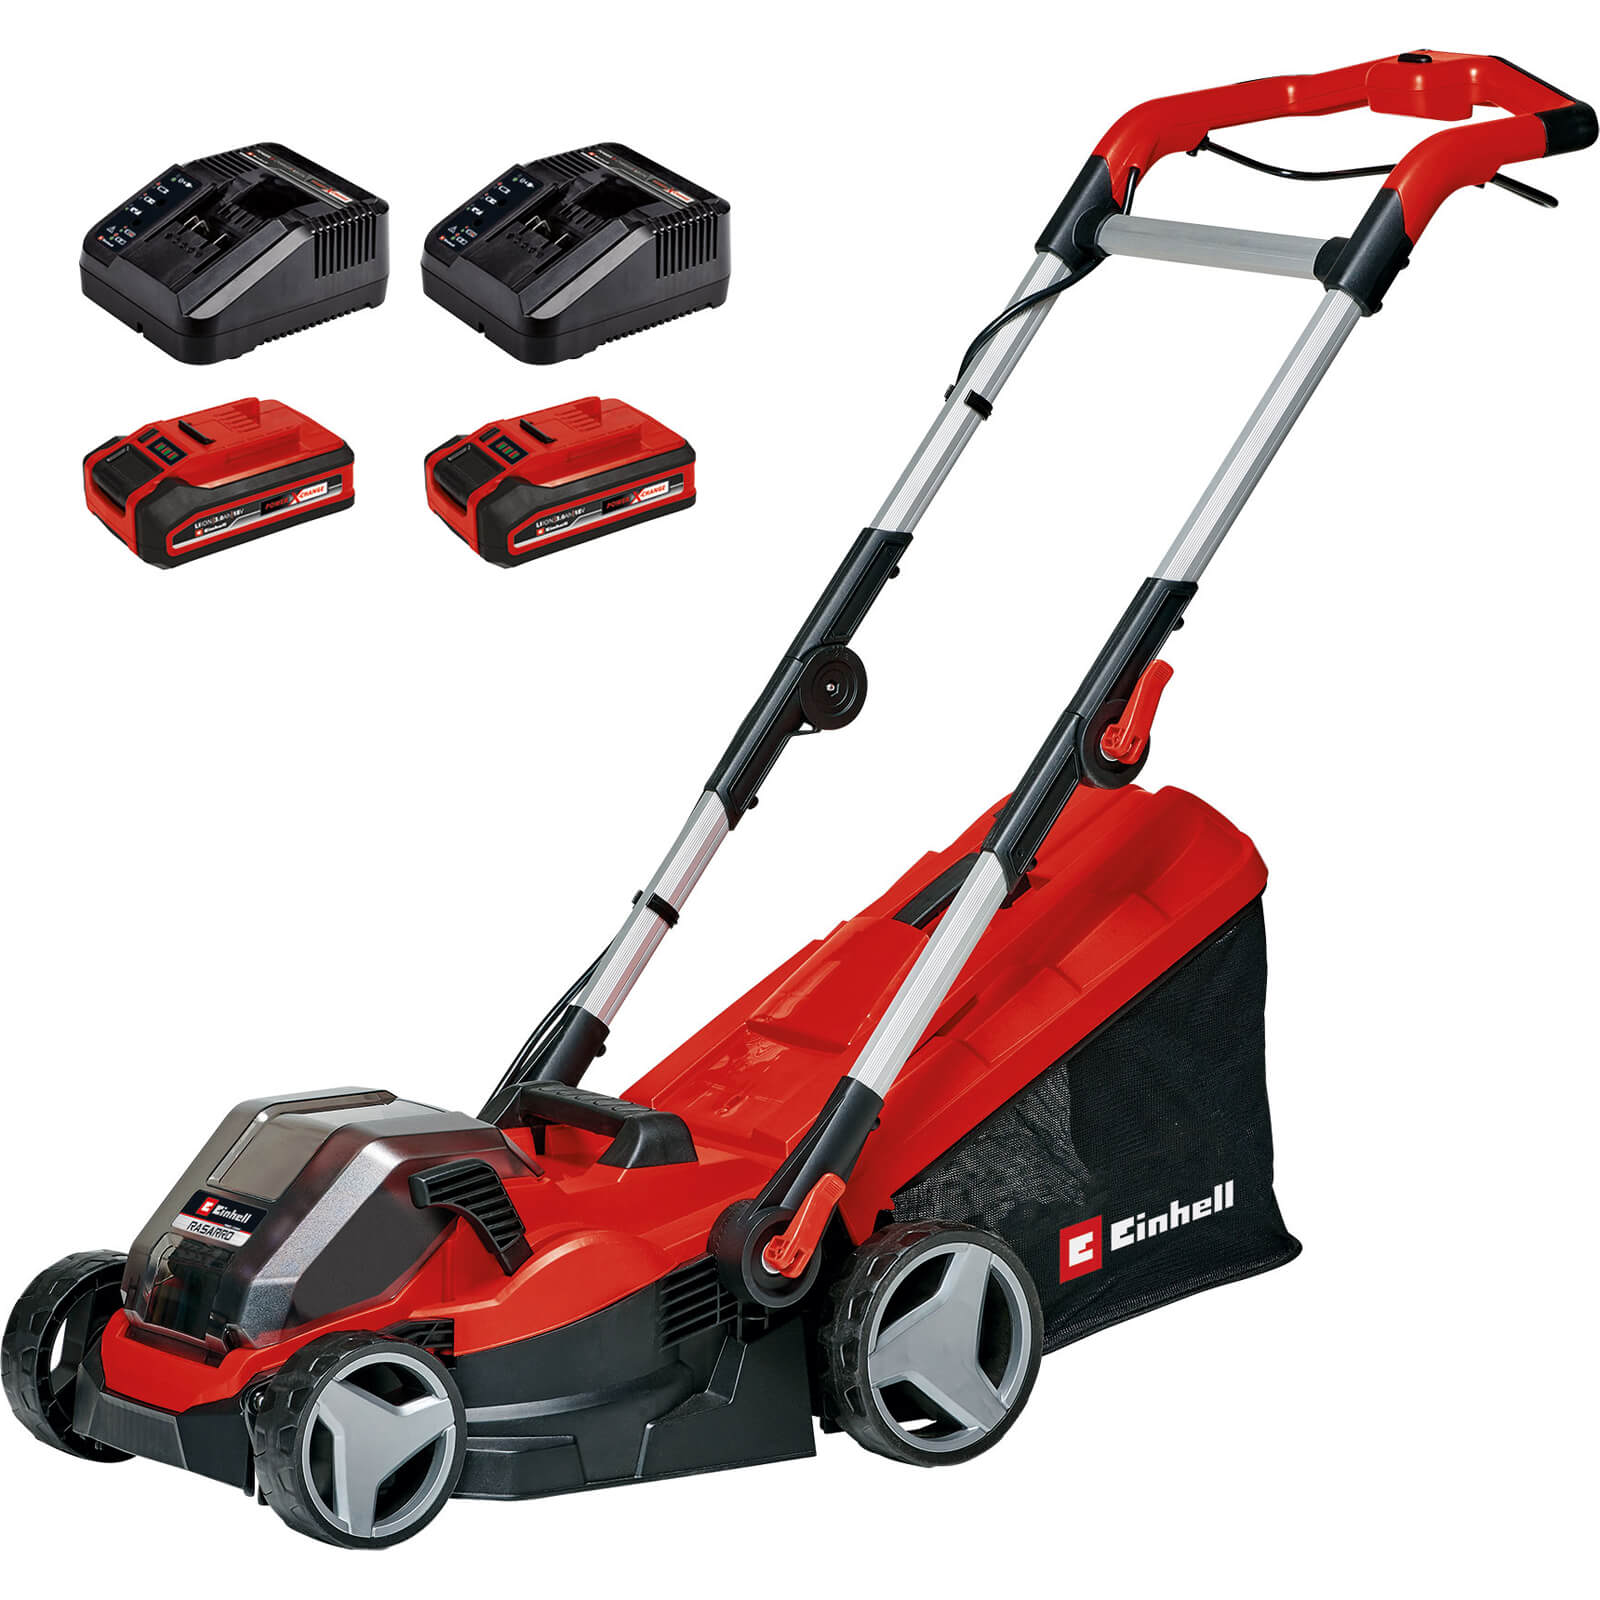 Image of Einhell RASARRO 36/34 36v Cordless Rotary Lawnmower 340mm 2 x 3ah Li-ion Twin Battery Charger